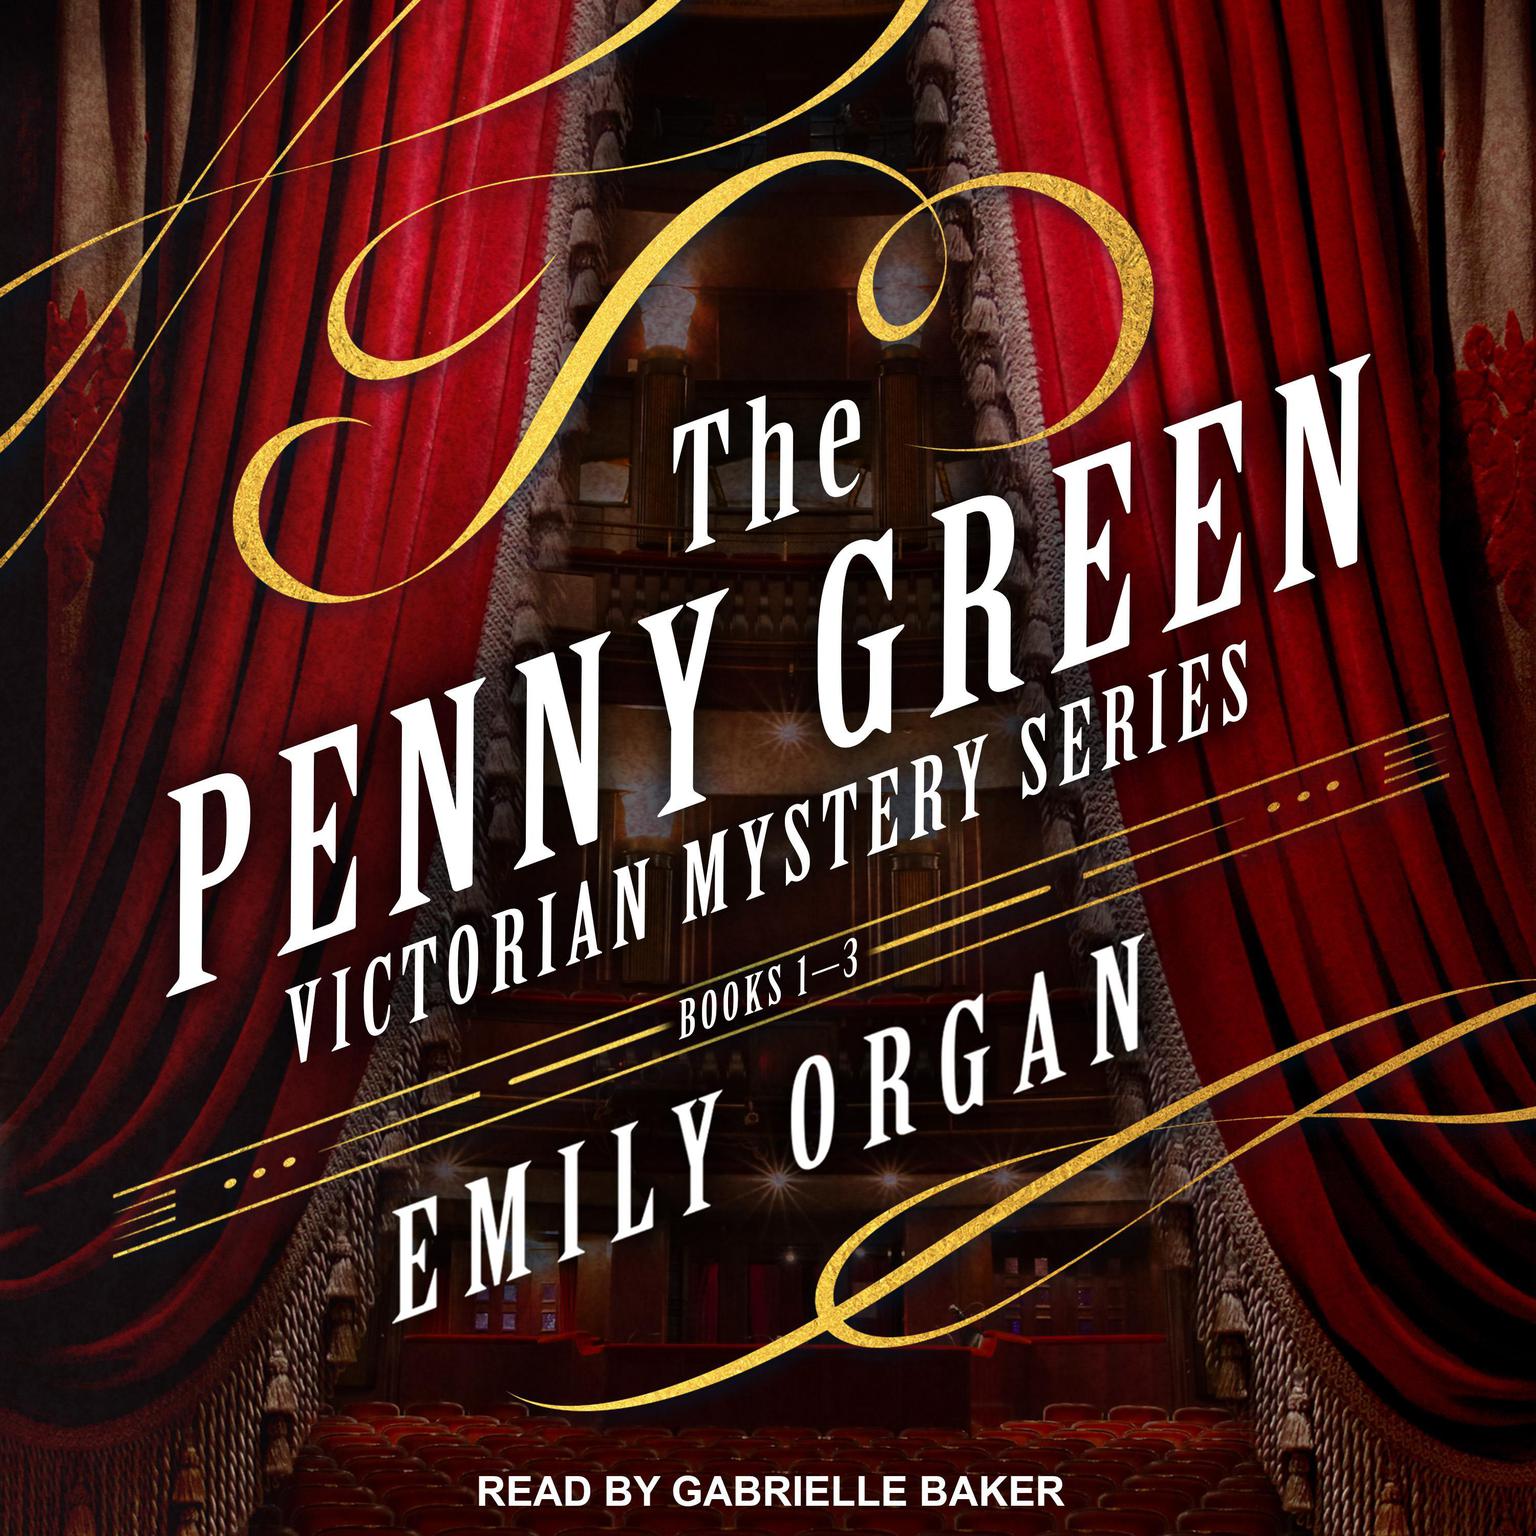 The Penny Green Victorian Mystery Series: Books 1-3 Audiobook, by Emily Organ